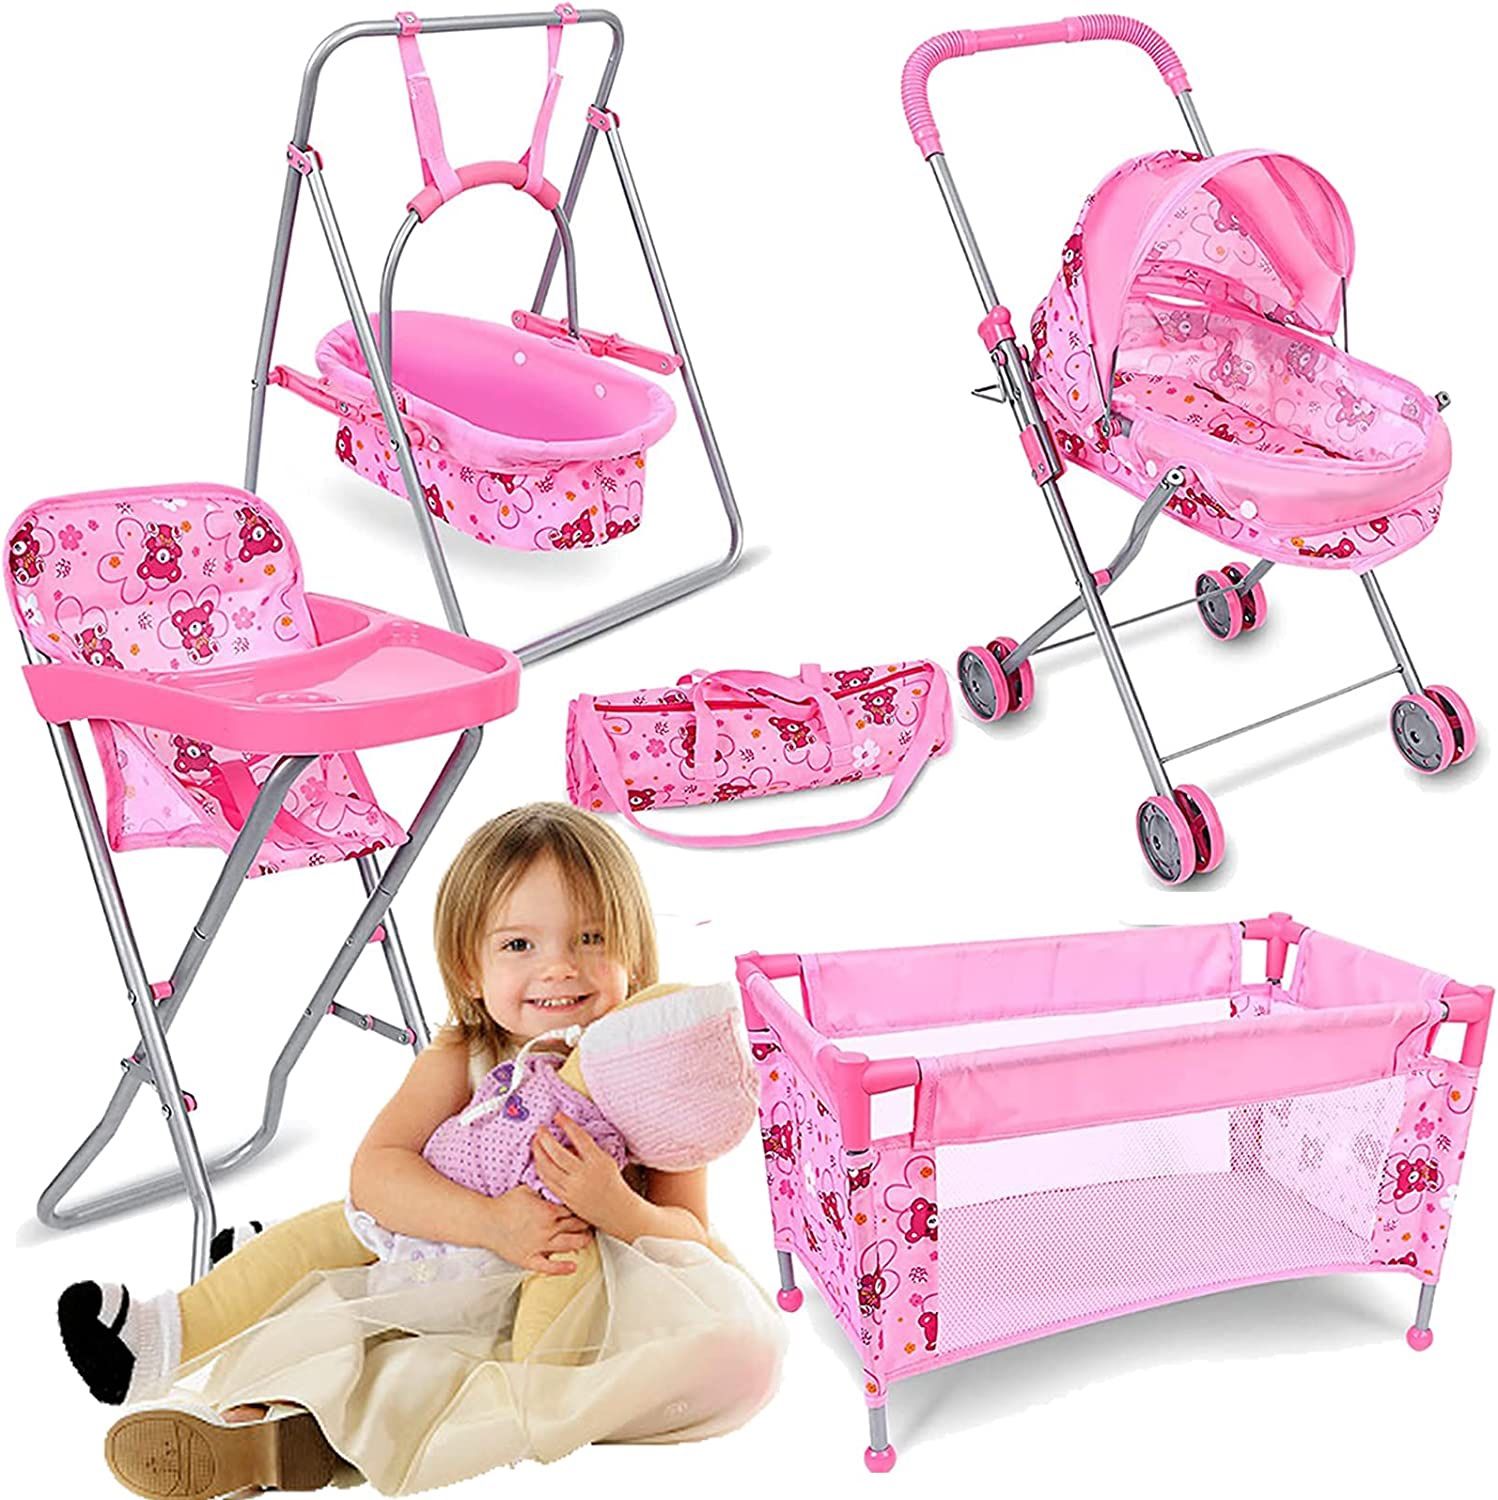 Baby Doll Stroller Set Fits 16" Dolls - 4 Pcs Deluxe Baby Doll Playset with Foldable Doll Stroller,Baby Doll Crib,Doll High Chair,Swing Baby Doll Acce